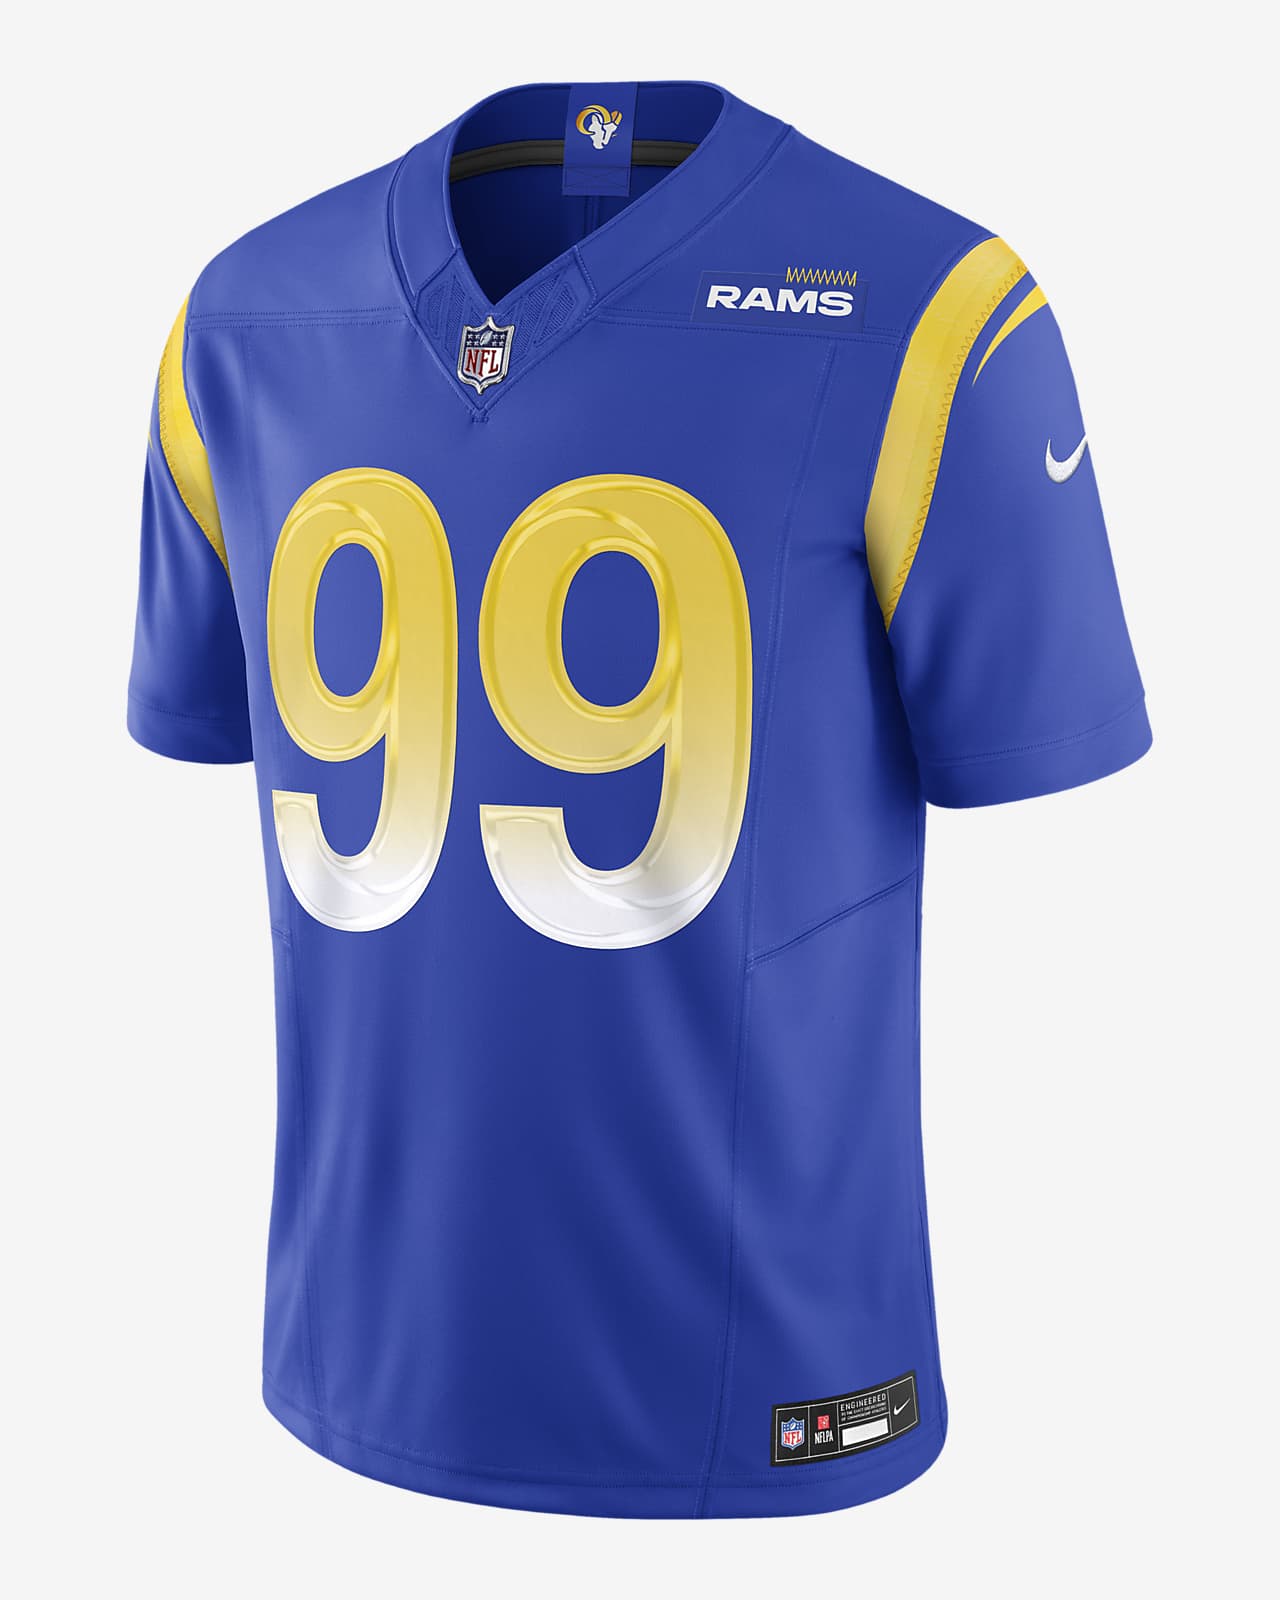 Aaron Donald Los Angeles Rams Men's Nike Dri-FIT NFL Limited Football Jersey